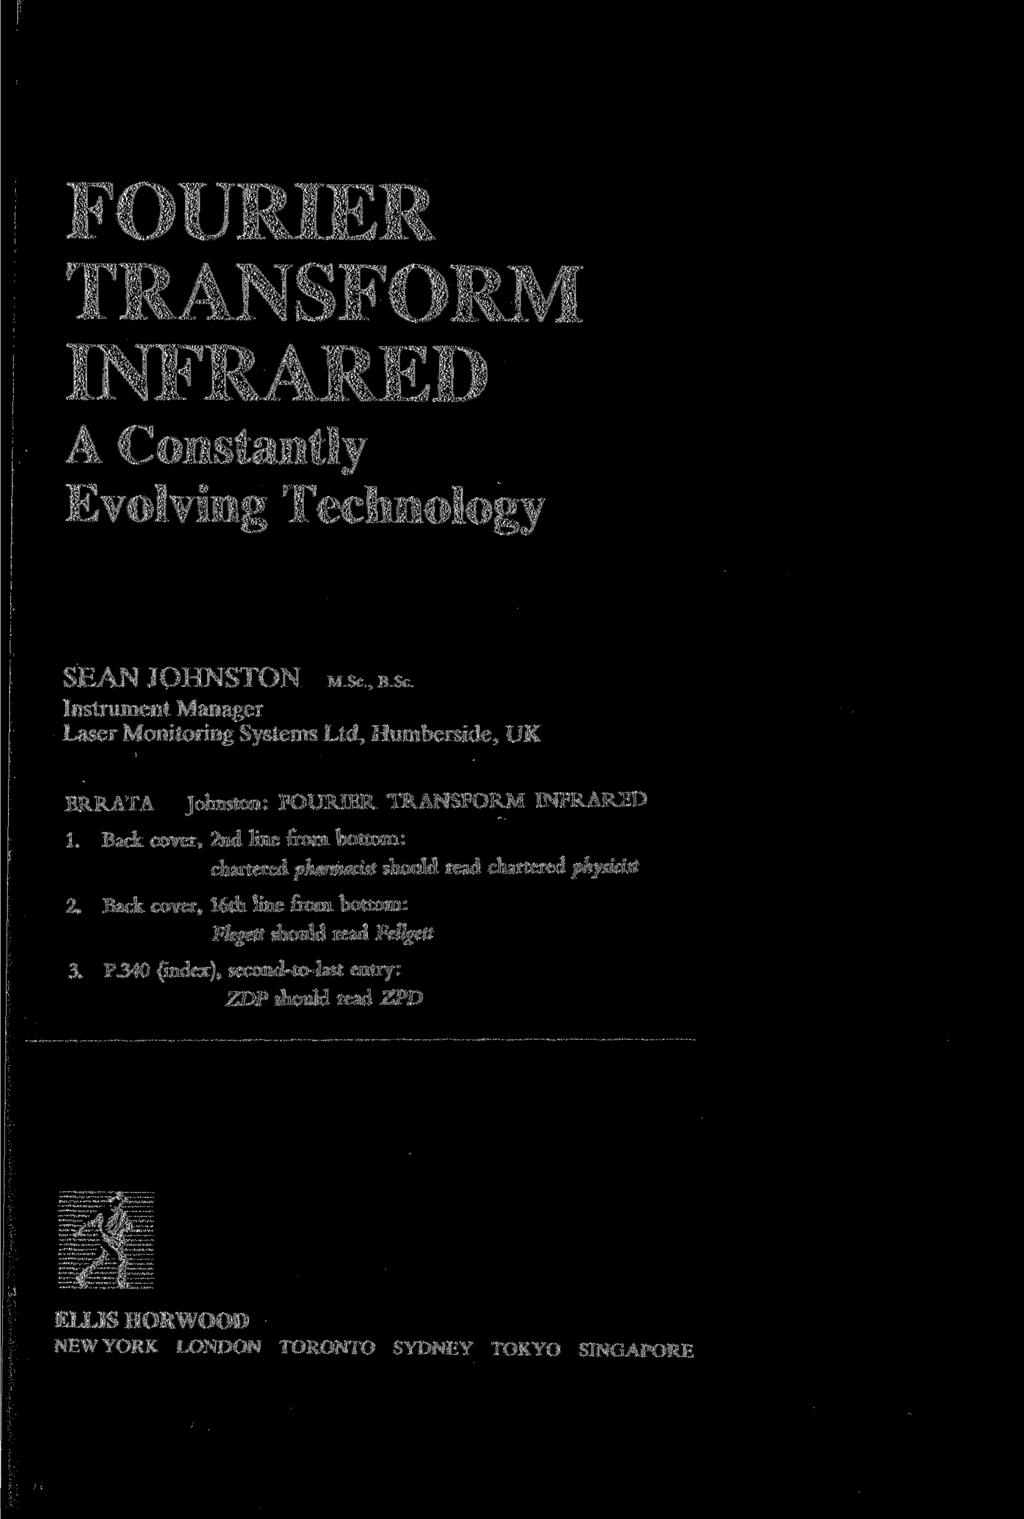 FOURIER TRANSFORM INFRARED A Constantly Evolving Technology SEAN JOHNSTON M.SCB.SC. Instrument Manager Laser Monitoring Systems Ltd, Humberside, UK ERRATA Johnston: FOURIER TRANSFORM INFRARED 1.